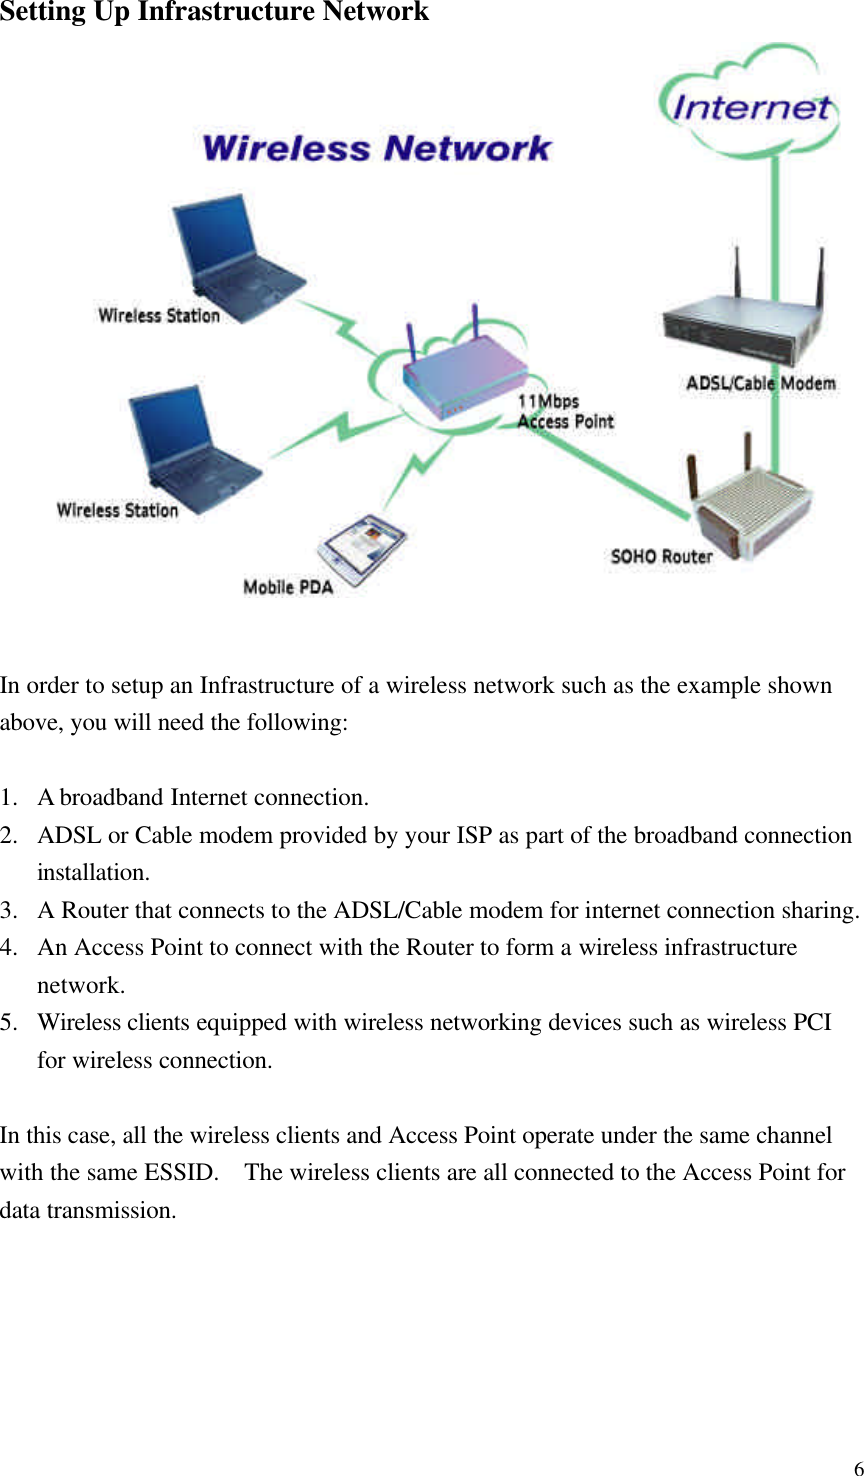  6 Setting Up Infrastructure Network                  In order to setup an Infrastructure of a wireless network such as the example shown above, you will need the following:  1. A broadband Internet connection. 2. ADSL or Cable modem provided by your ISP as part of the broadband connection installation. 3. A Router that connects to the ADSL/Cable modem for internet connection sharing. 4. An Access Point to connect with the Router to form a wireless infrastructure network. 5. Wireless clients equipped with wireless networking devices such as wireless PCI for wireless connection.  In this case, all the wireless clients and Access Point operate under the same channel with the same ESSID.  The wireless clients are all connected to the Access Point for data transmission.  